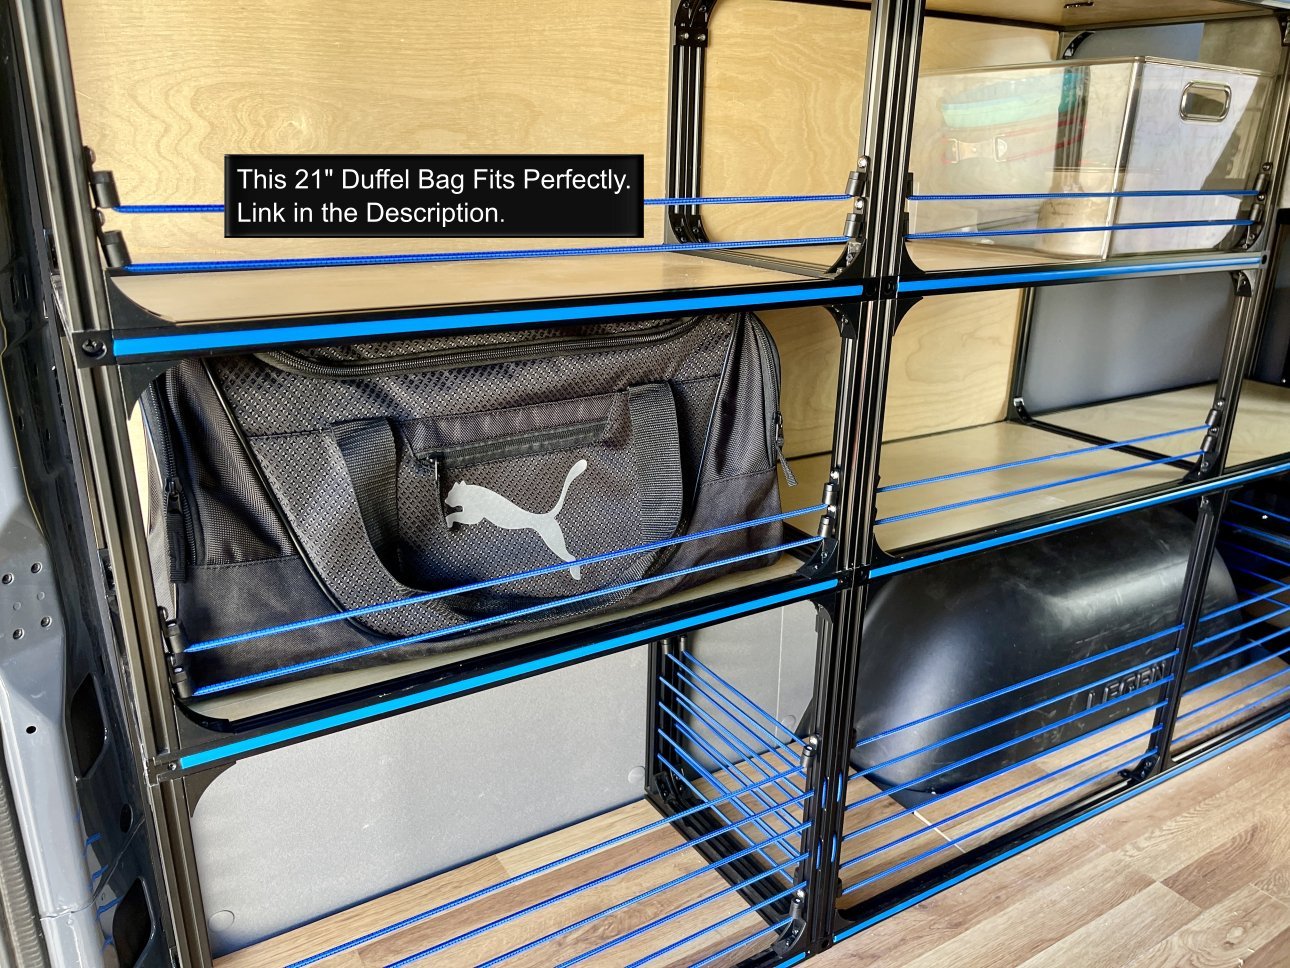 ram promaster 159 van shelving with duffel bag storage, front view